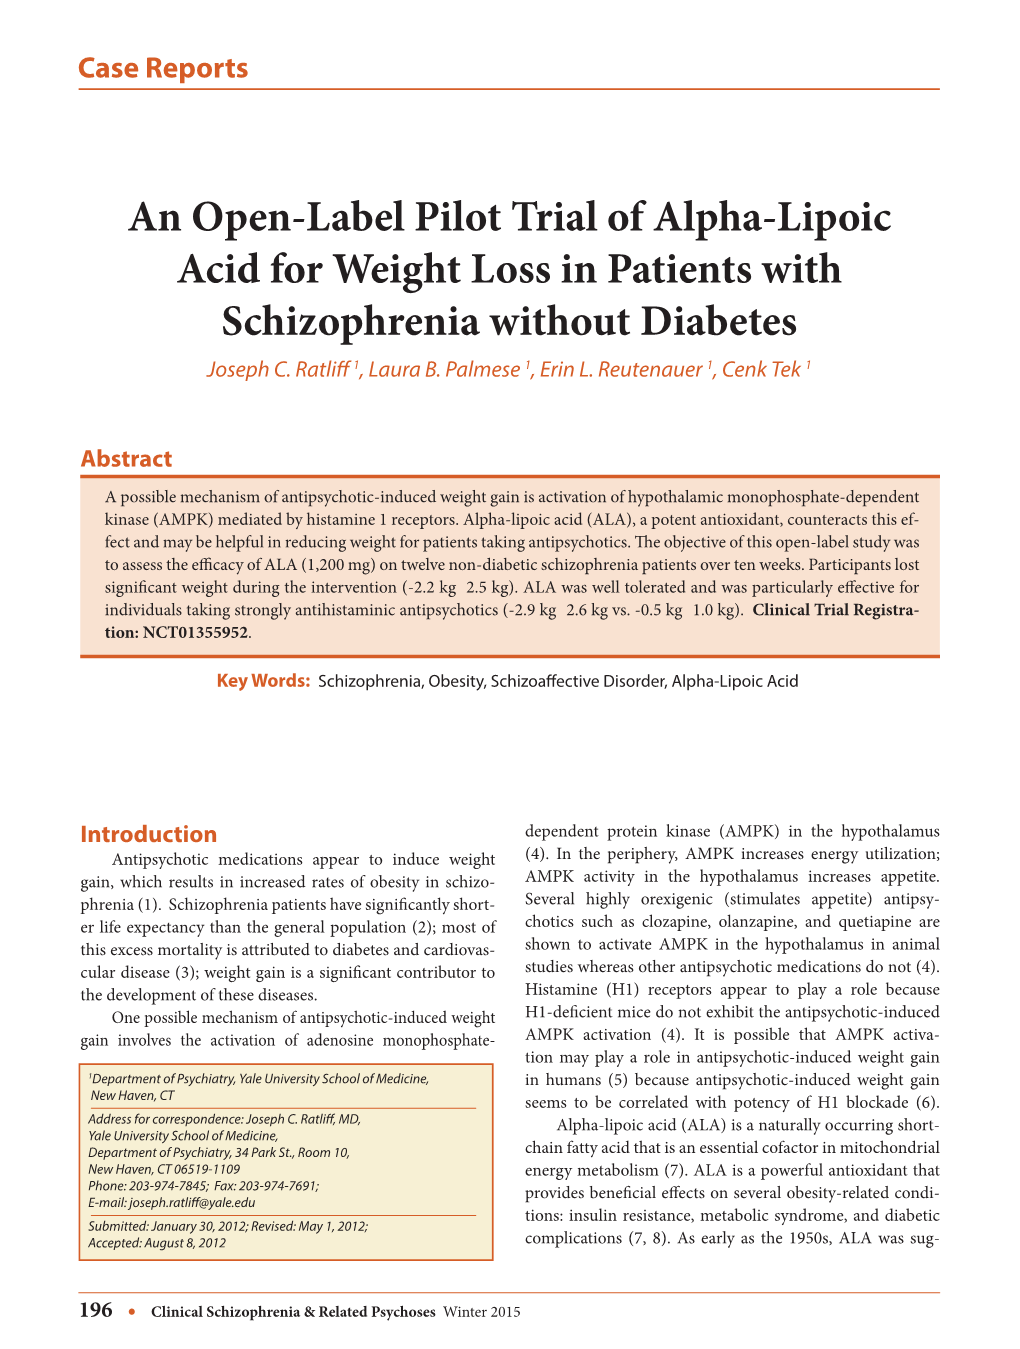 An Open-Label Pilot Trial of Alpha-Lipoic Acid for Weight Loss in Patients with Schizophrenia Without Diabetes Joseph C